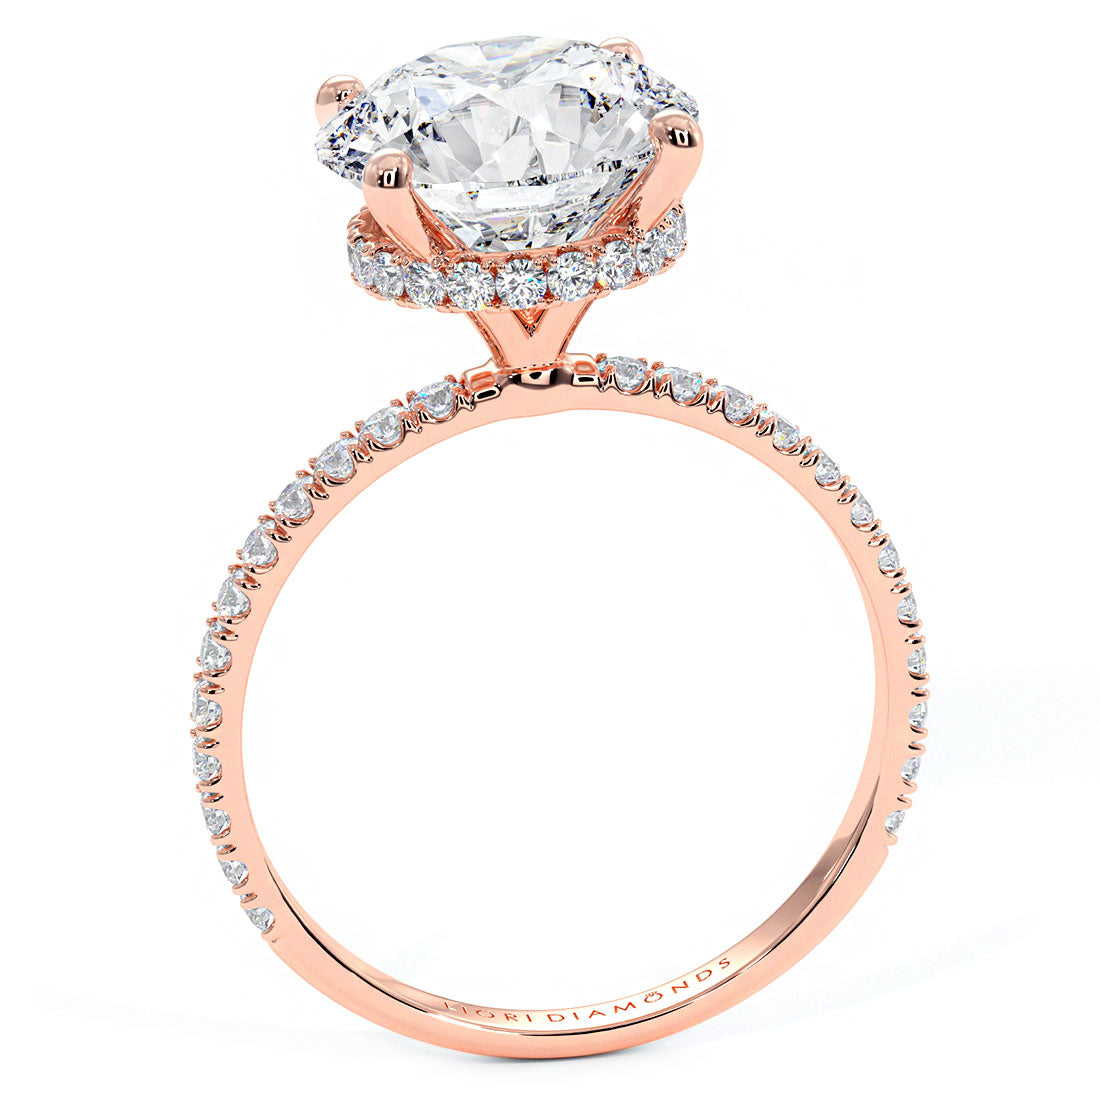 3.74ctw GIA Certified Round Brilliant Under Halo Petite Micropavé Lab Grown Diamond Engagement Ring set in 14k Rose Gold